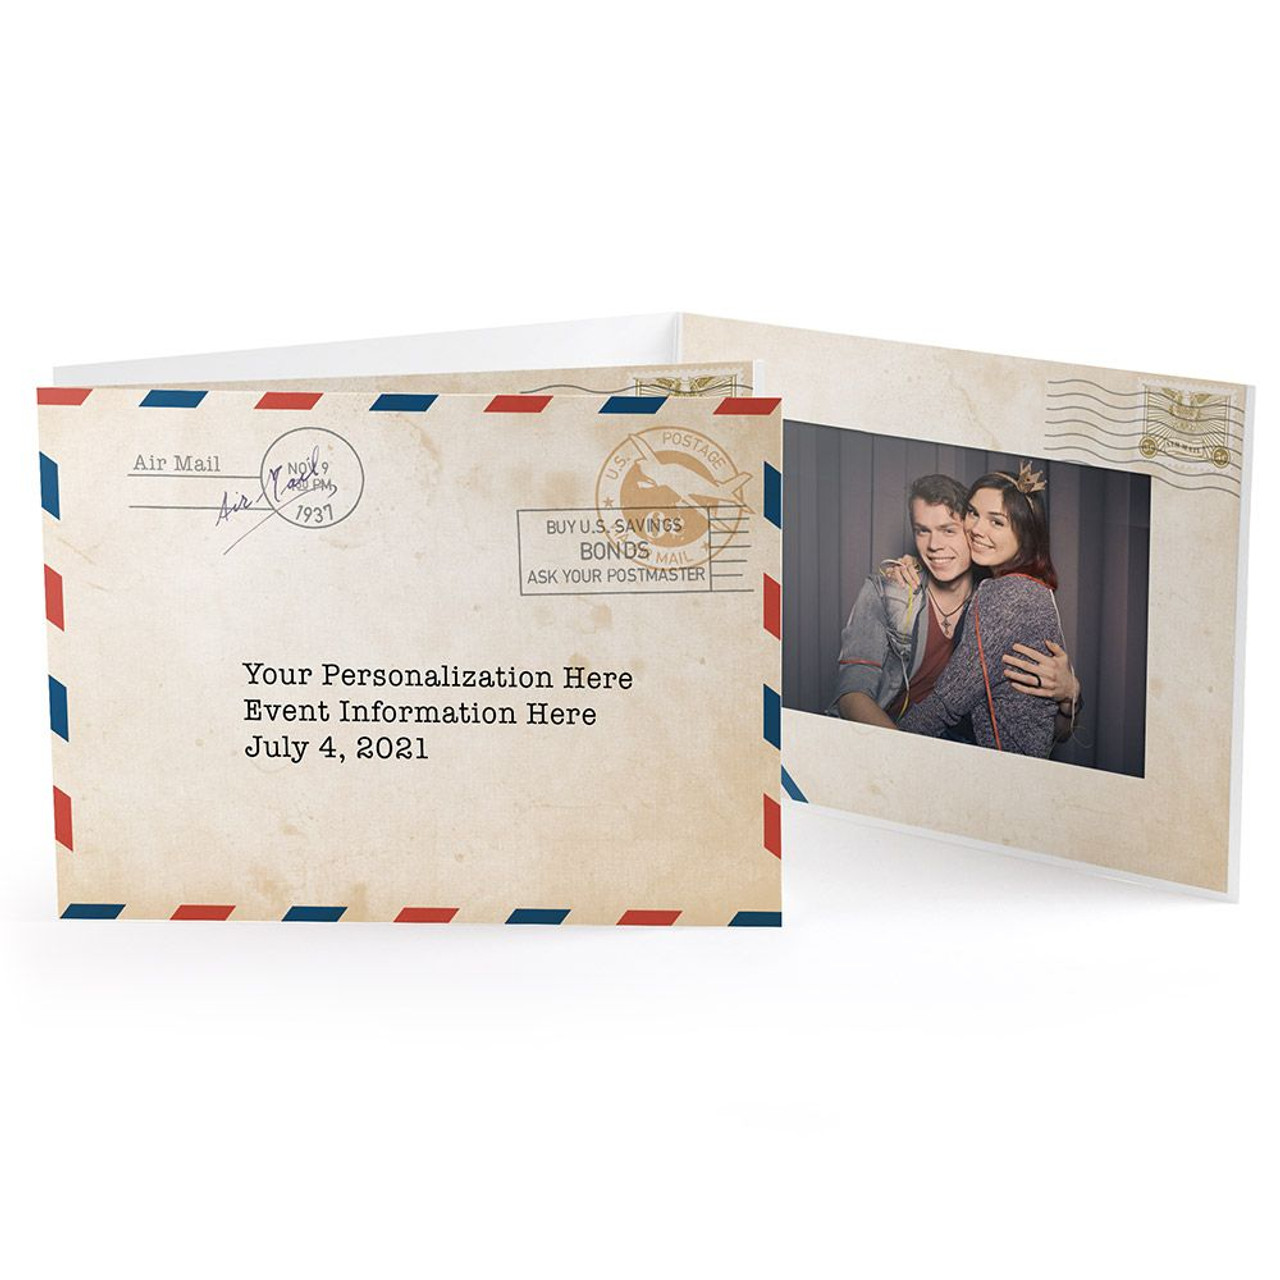 air mail postcard frame with copy space for your text or design